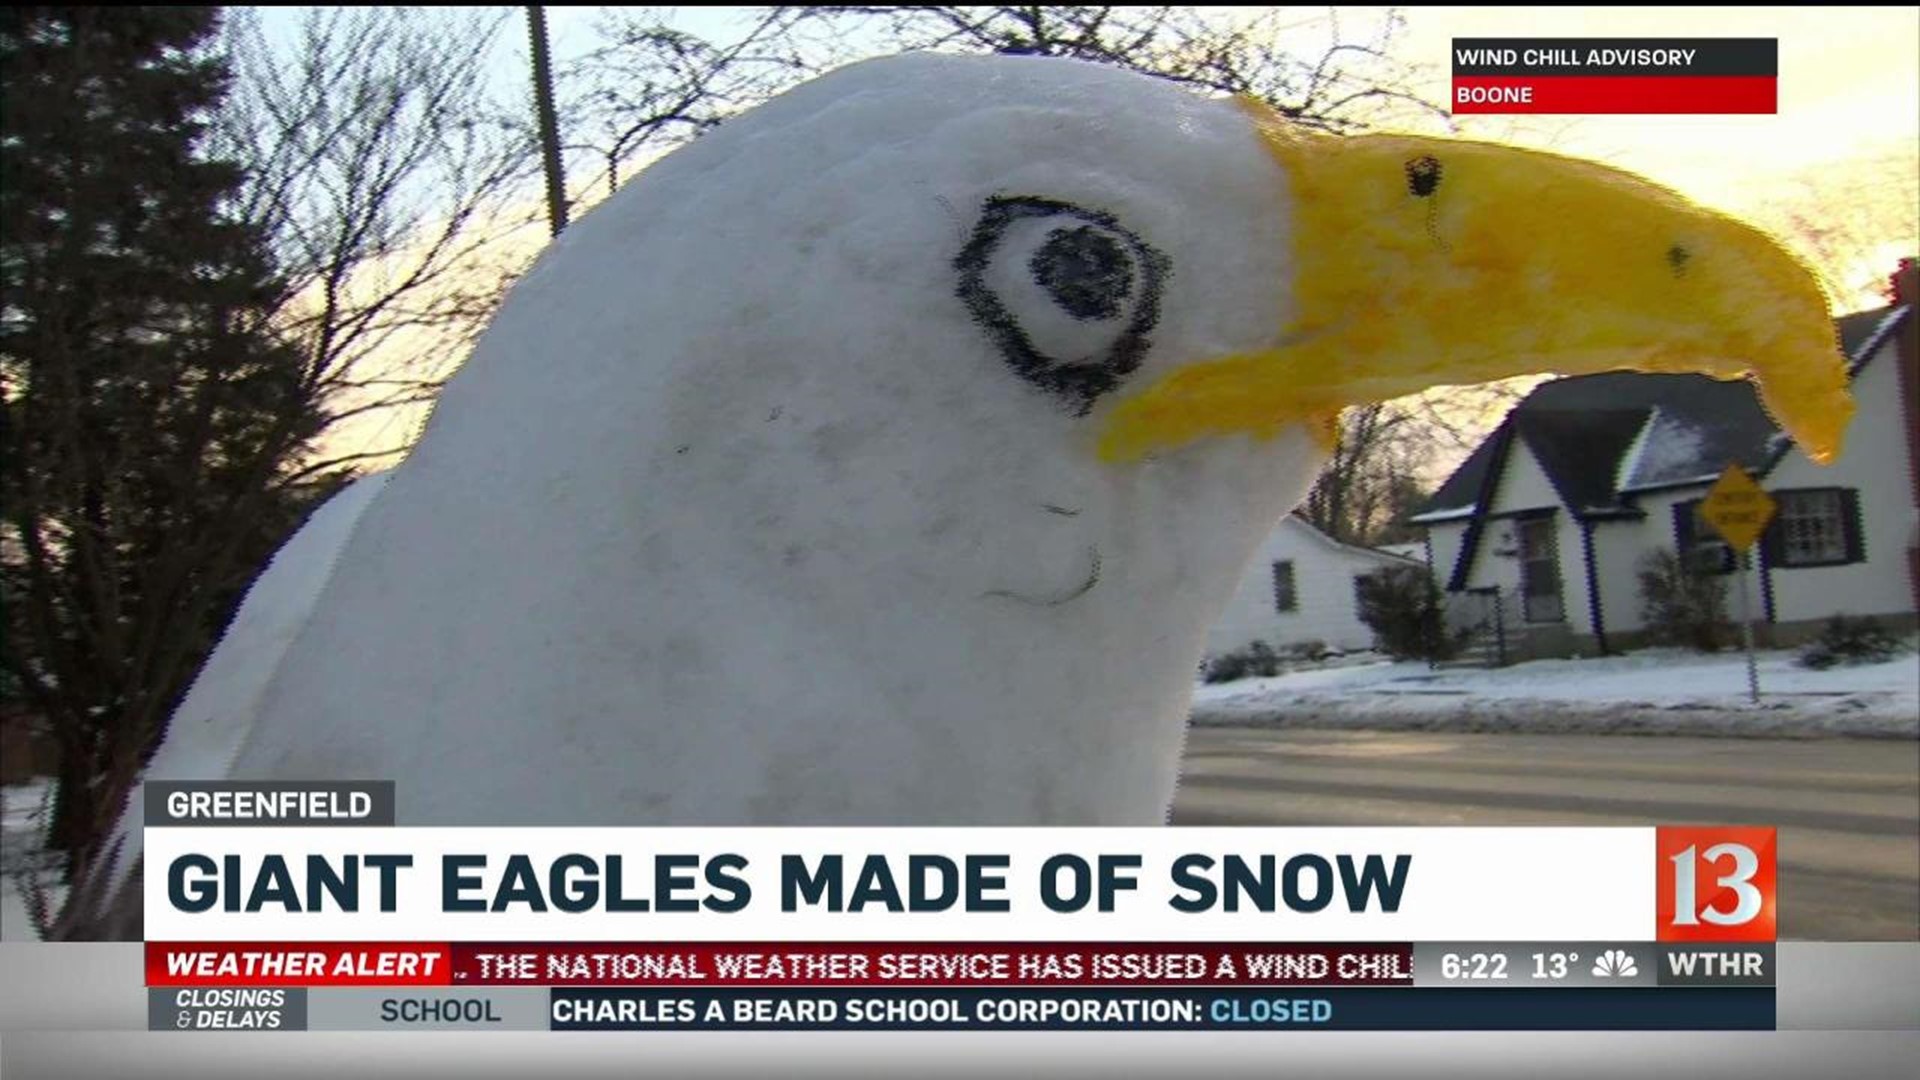 Giant Eagles Made of Snow